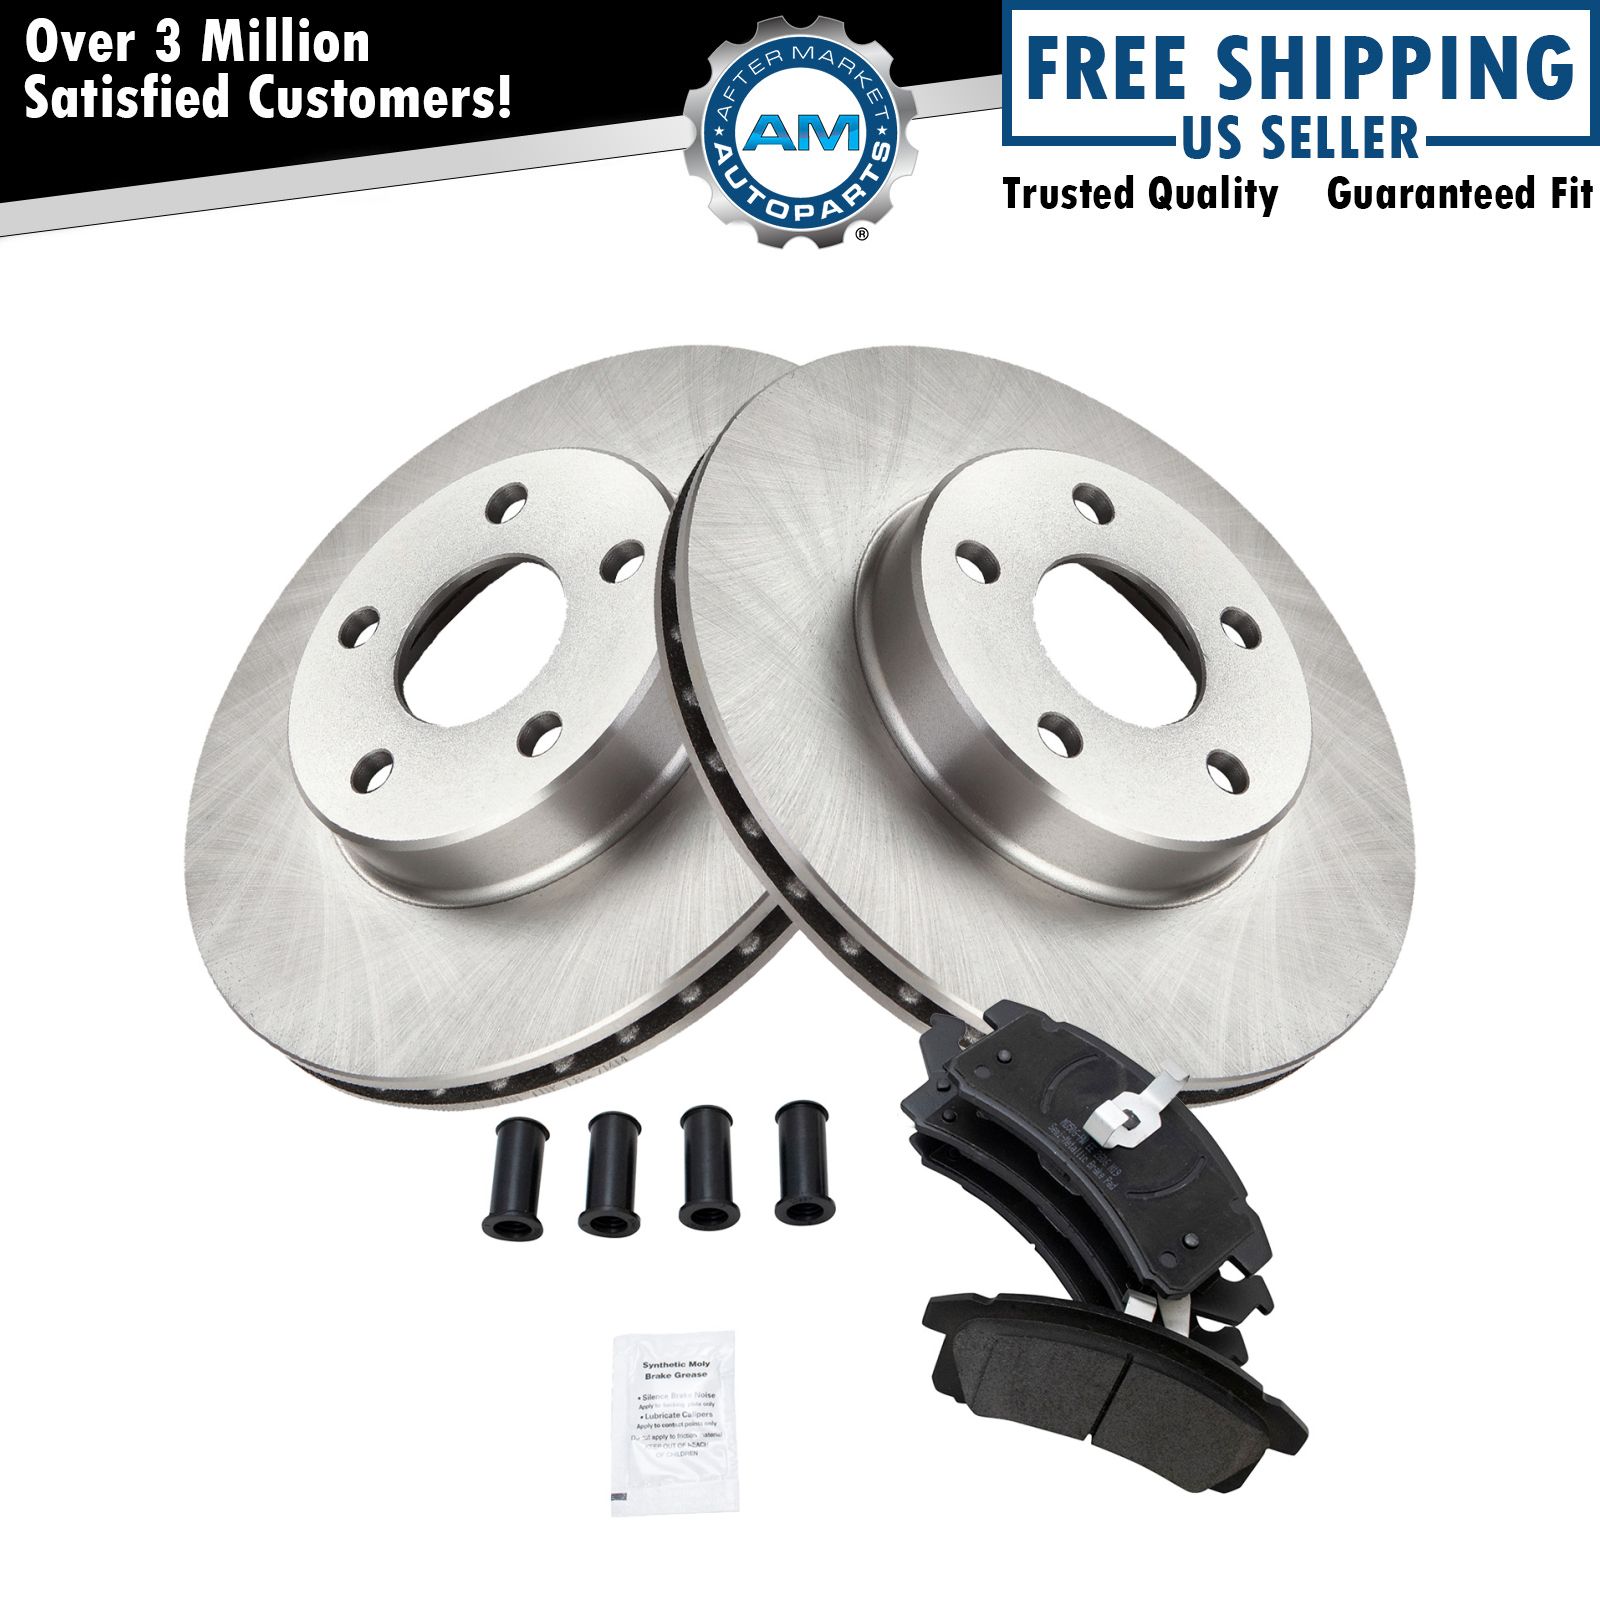 Front Metallic Disc Brake Pad & Rotor Kit for Buick Chevy Olds Pontiac